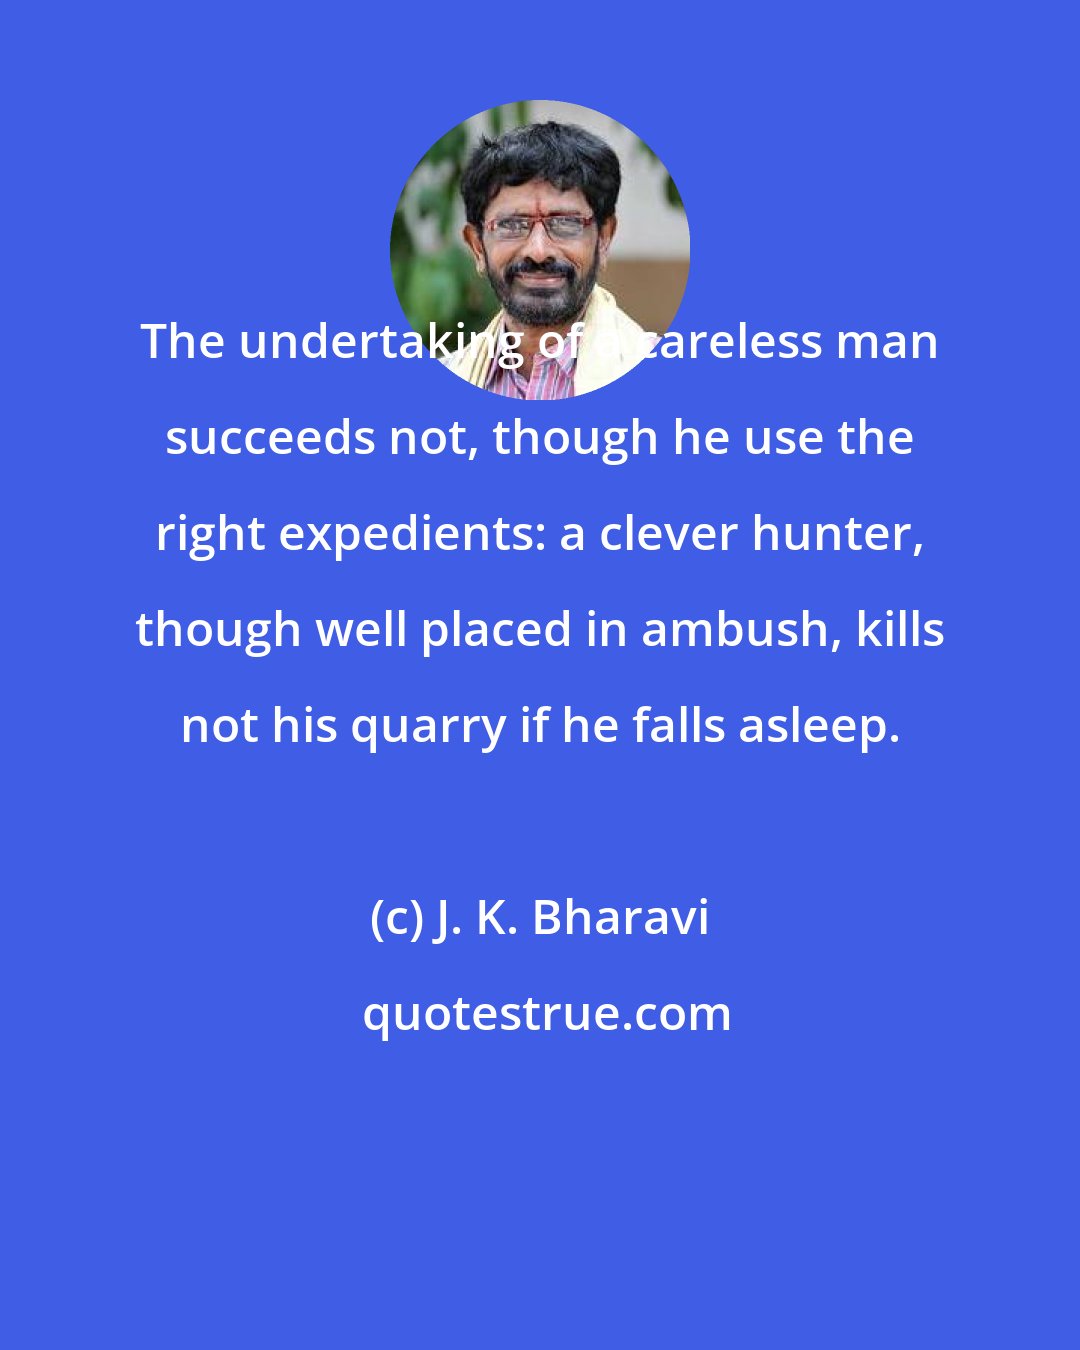 J. K. Bharavi: The undertaking of a careless man succeeds not, though he use the right expedients: a clever hunter, though well placed in ambush, kills not his quarry if he falls asleep.